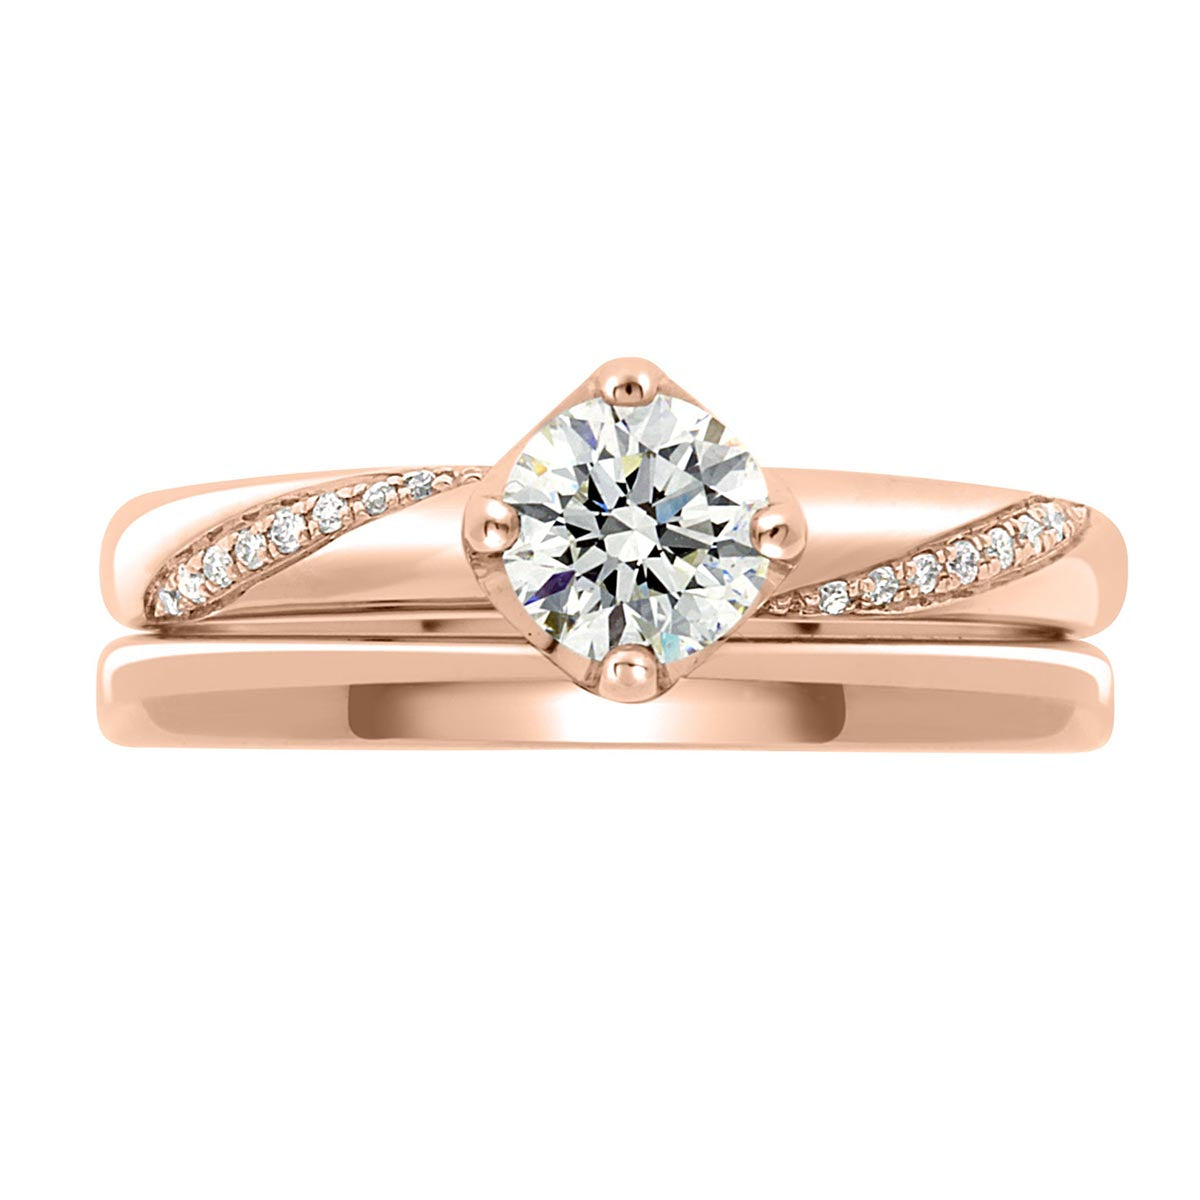 Crossover Band Engagement Ring made from rose gold with a matching plain wedding ring